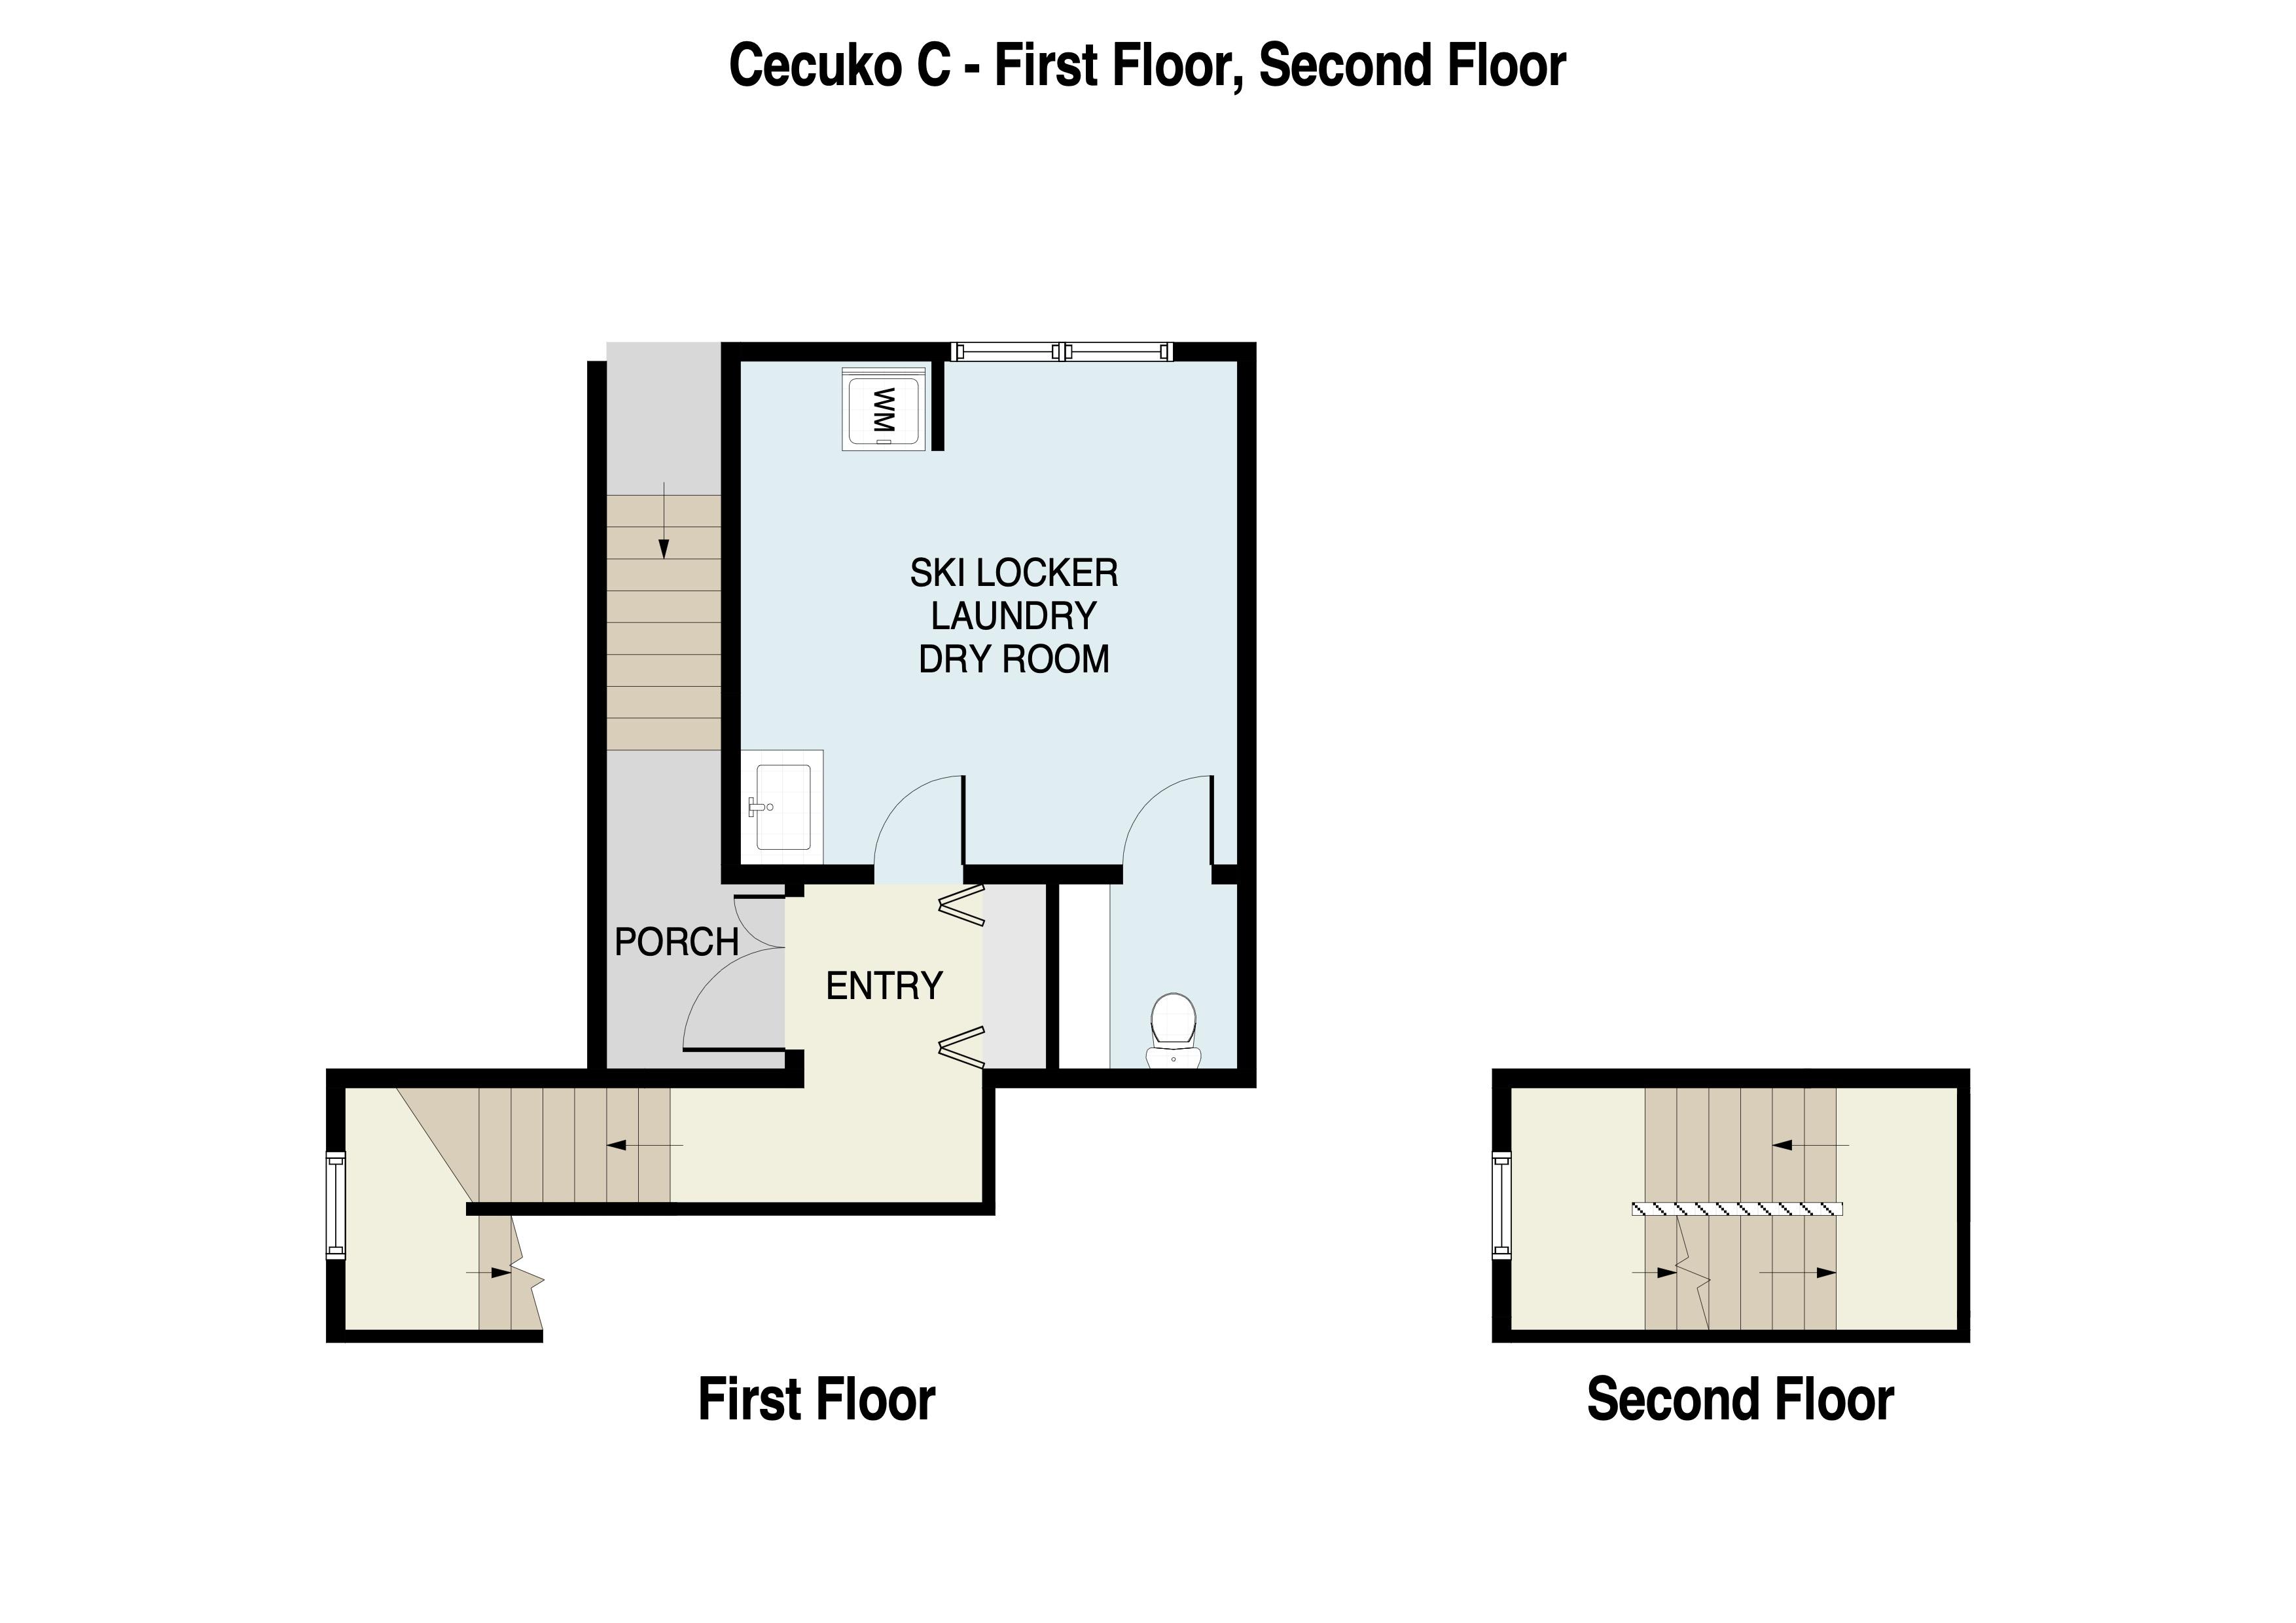 Cecuko C 1st and 2nd Floor Plans